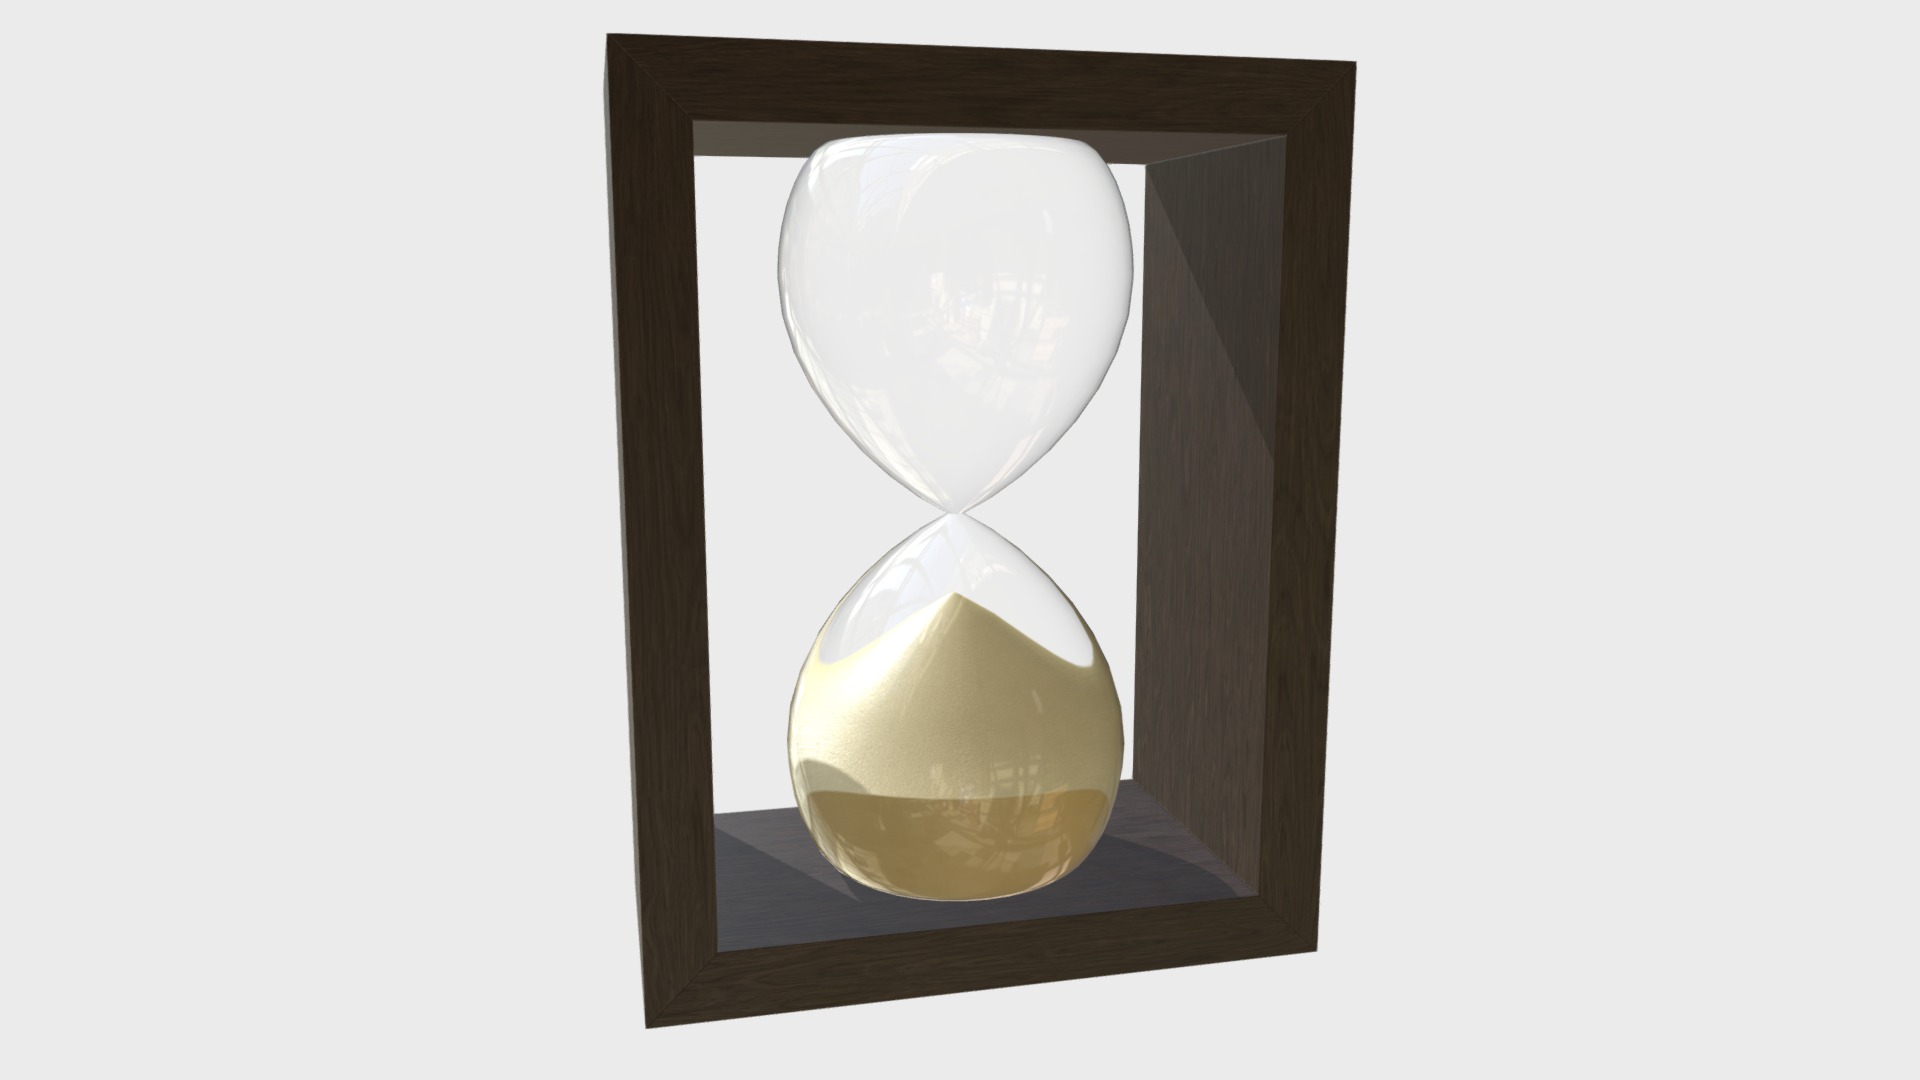 3D model Deco hourglass 1 - This is a 3D model of the Deco hourglass 1. The 3D model is about a glass vase on a shelf.